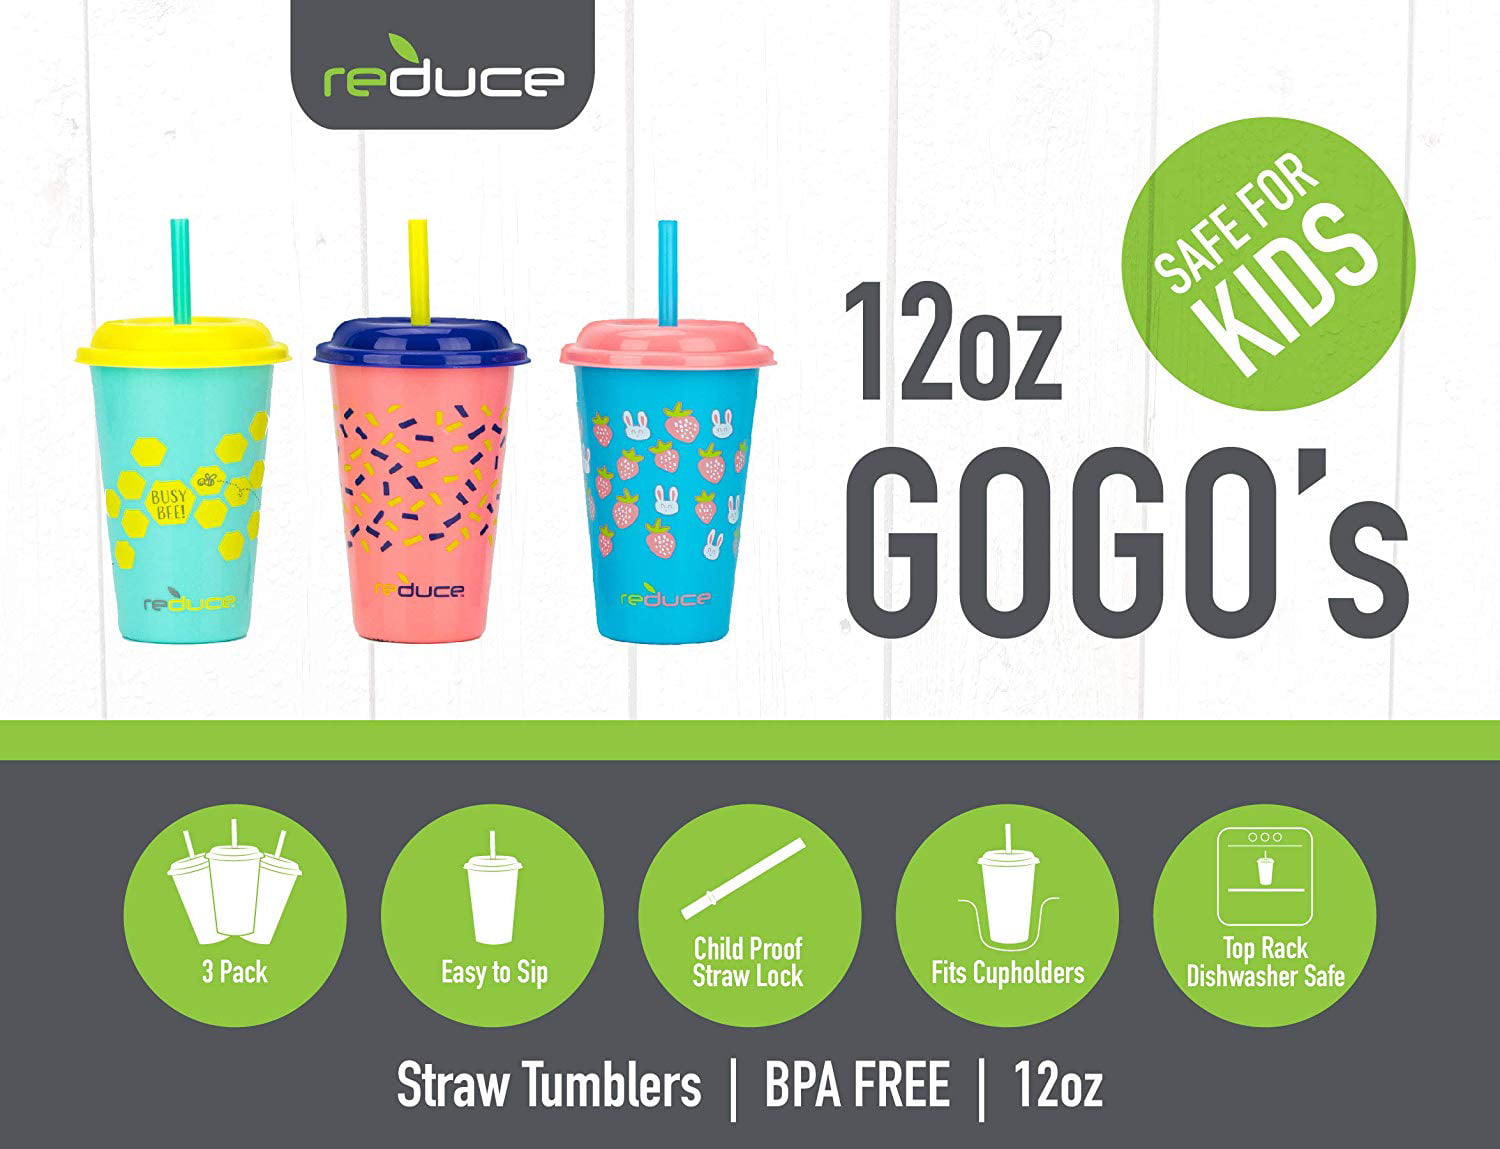 Reduce GoGo's, 3 Pack – 12oz Cups with Straws for Kids – Kids Cups with  Lids and Straws are the Perfect Toddler Tumbler – Dishwasher Safe, 3 Fun  Designs – An Ideal Kids Smoothie Cu 